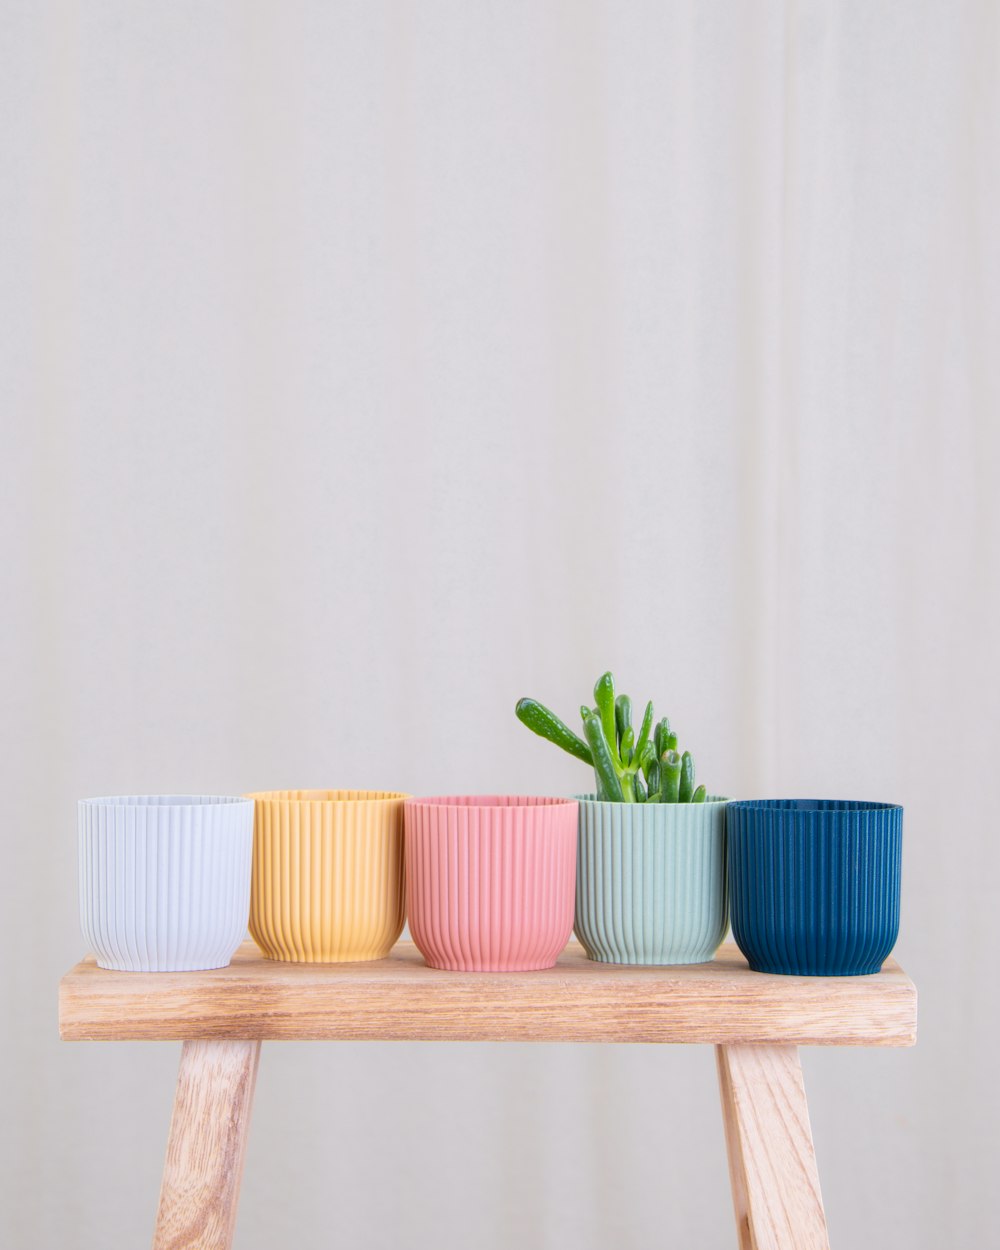 a wooden table topped with four different colored bowls